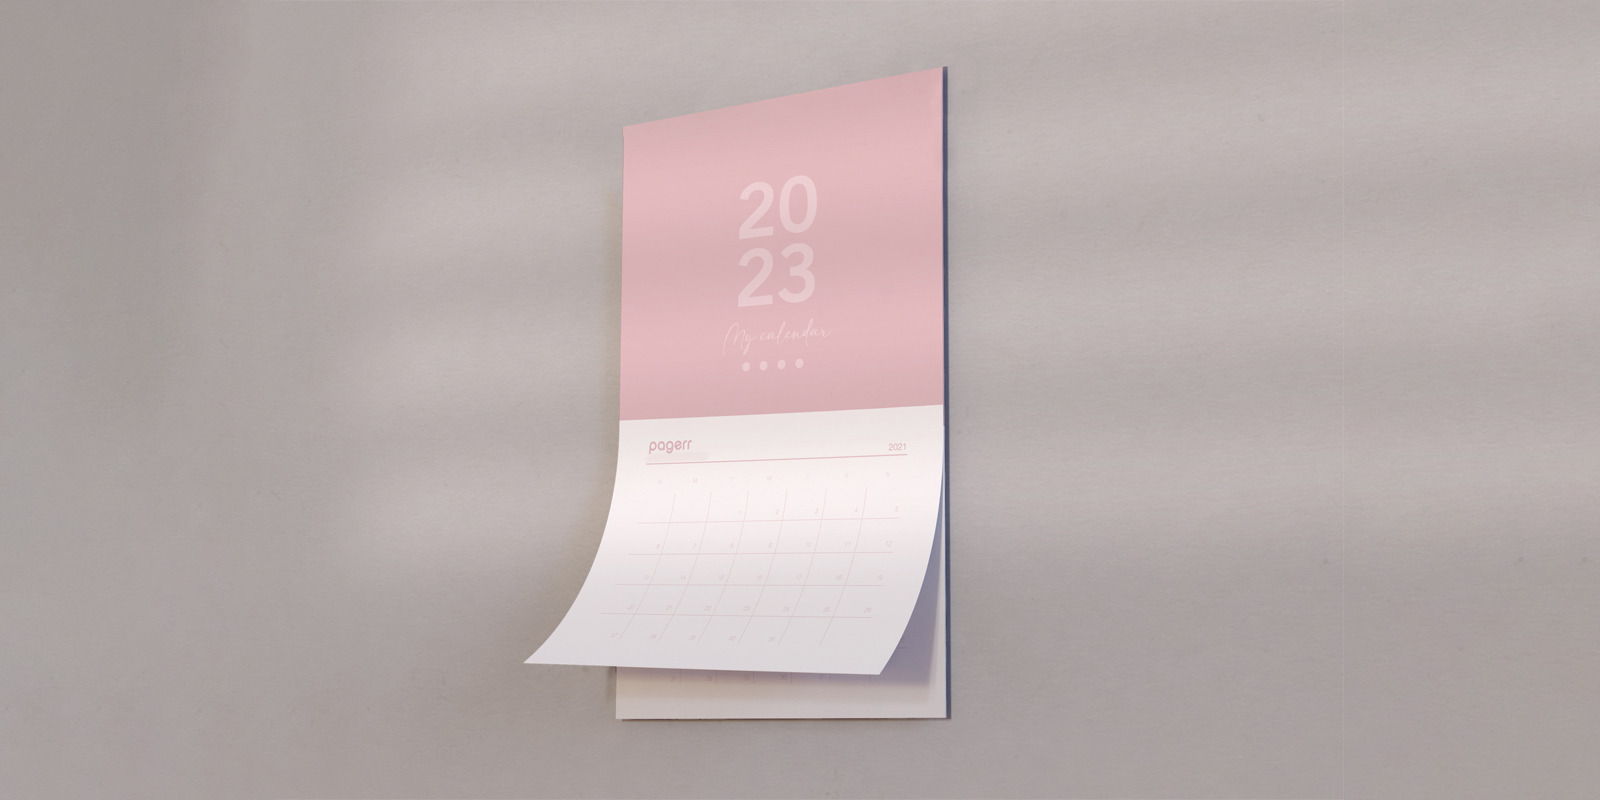 Magnetic calendars in Brisbane - Print with Pagerr